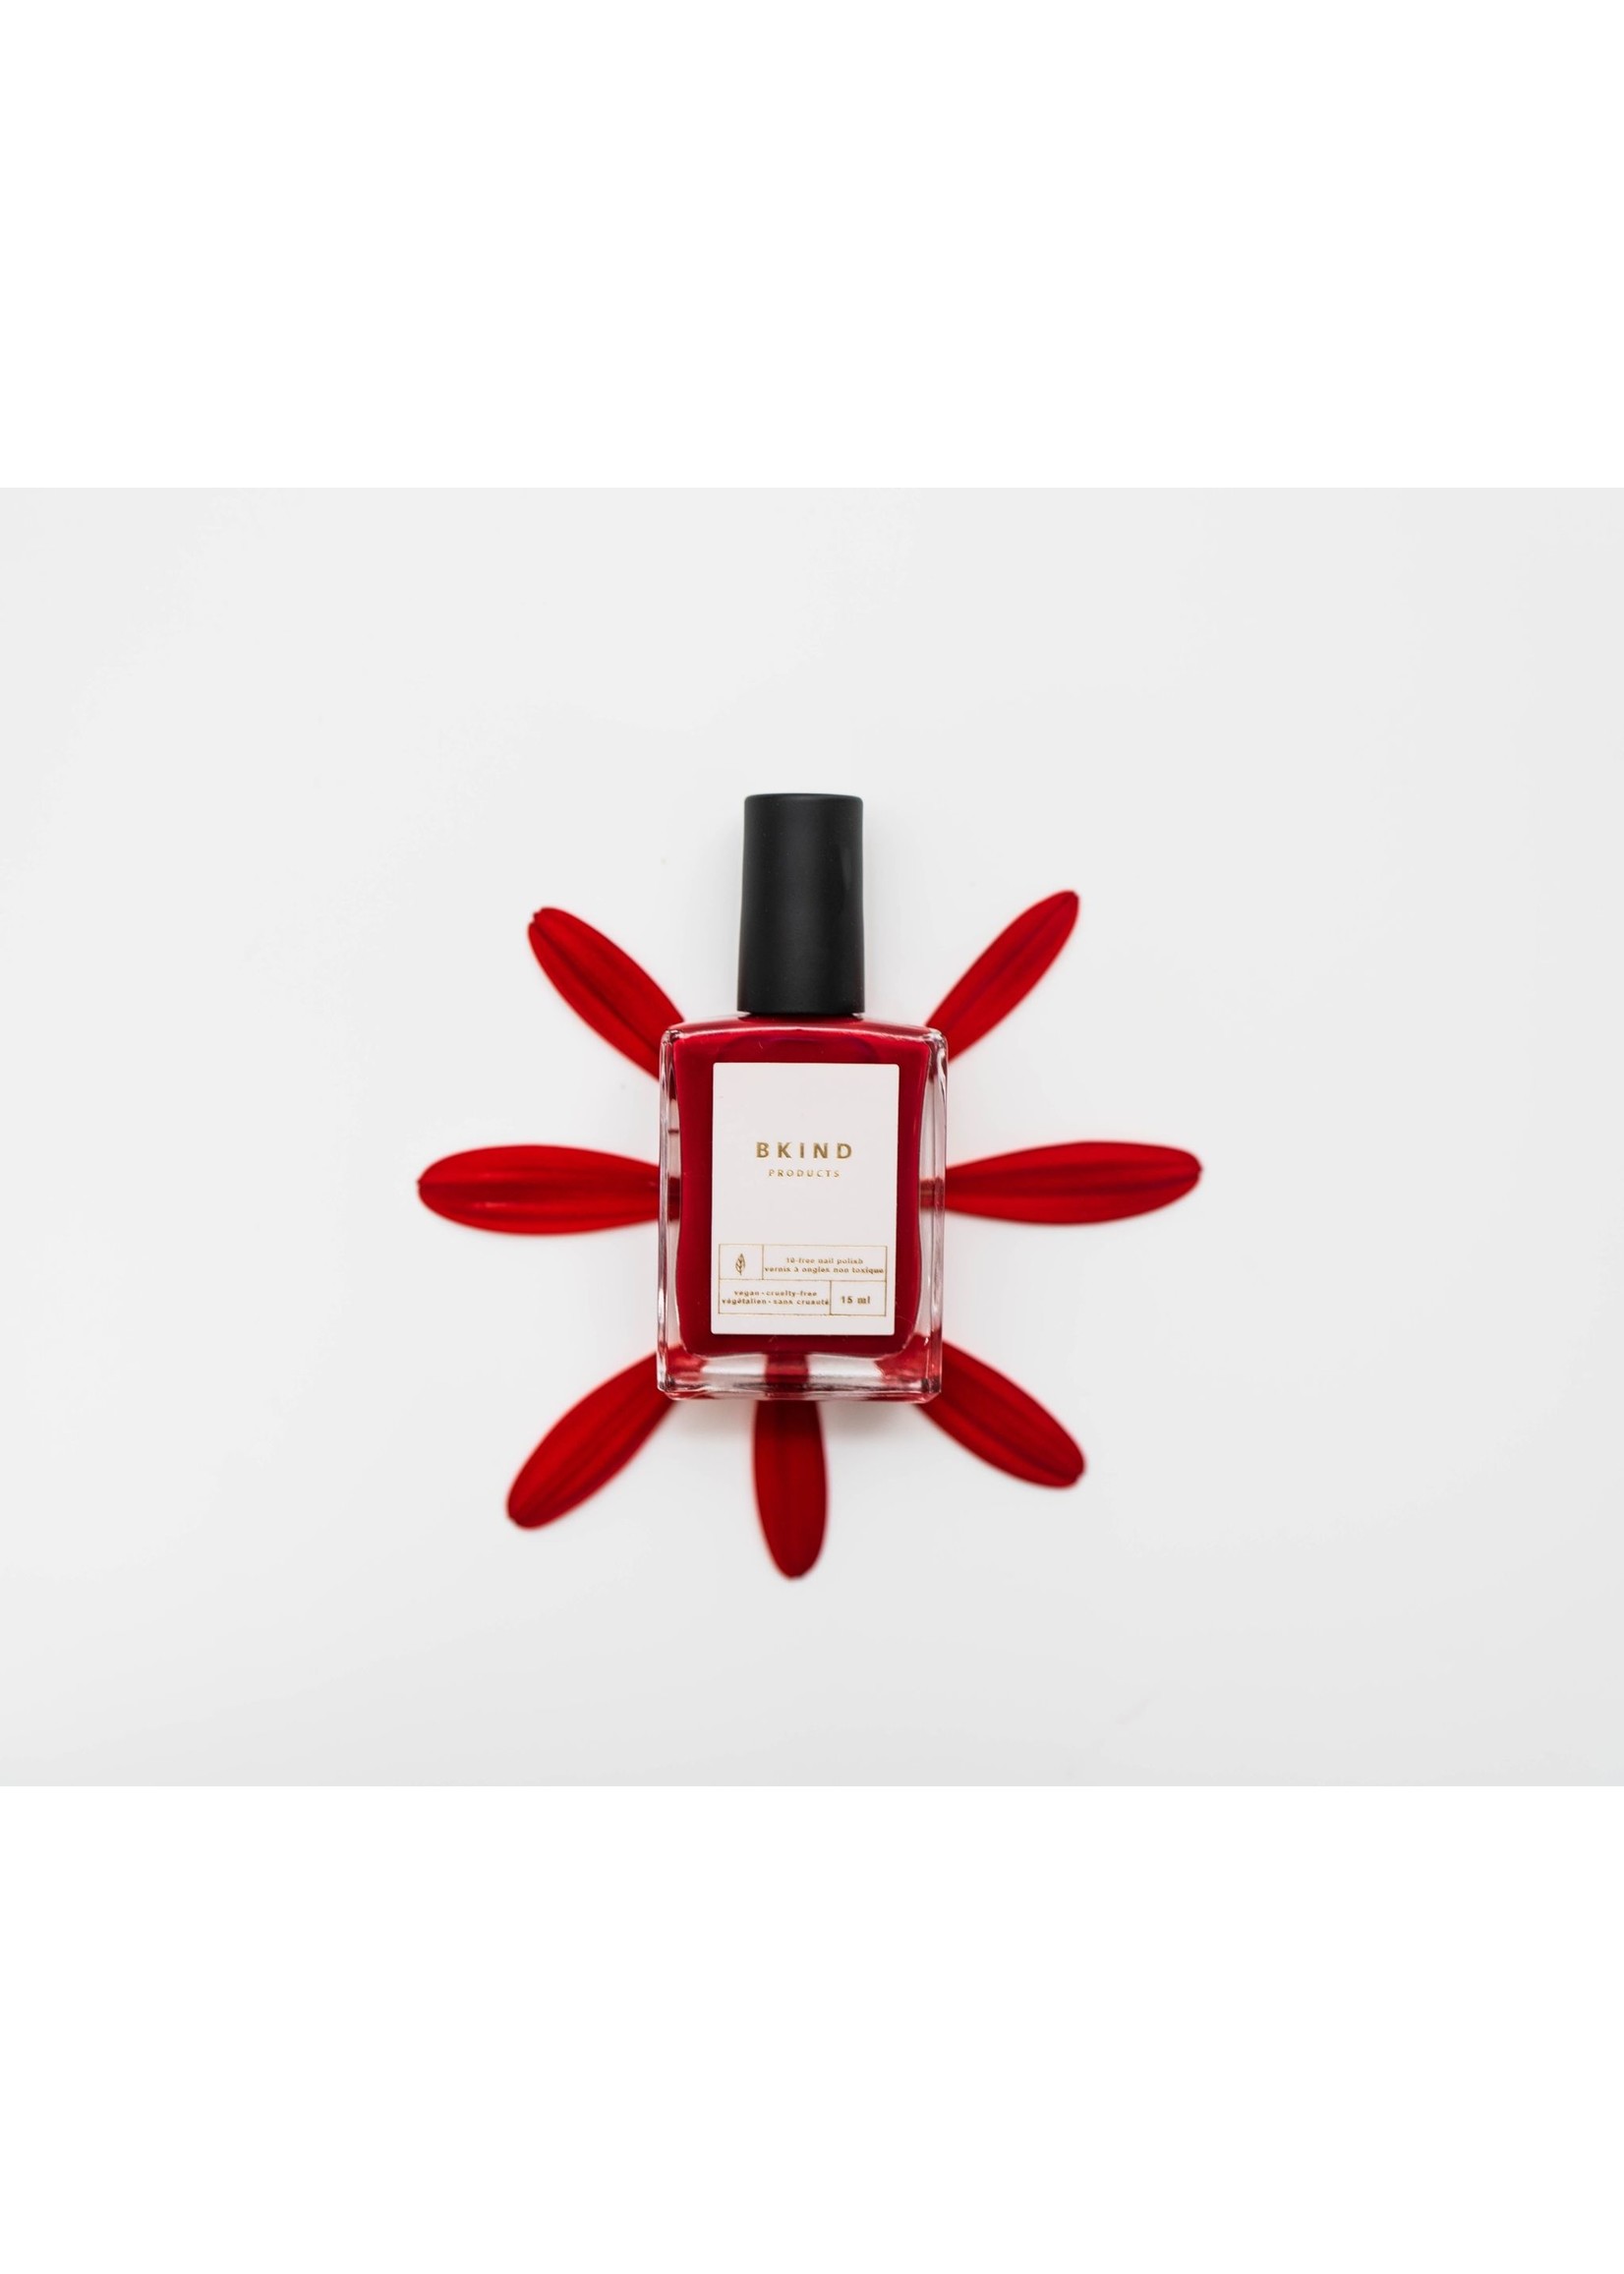 Bkind Vernis à ongle 15ml: Lady in red